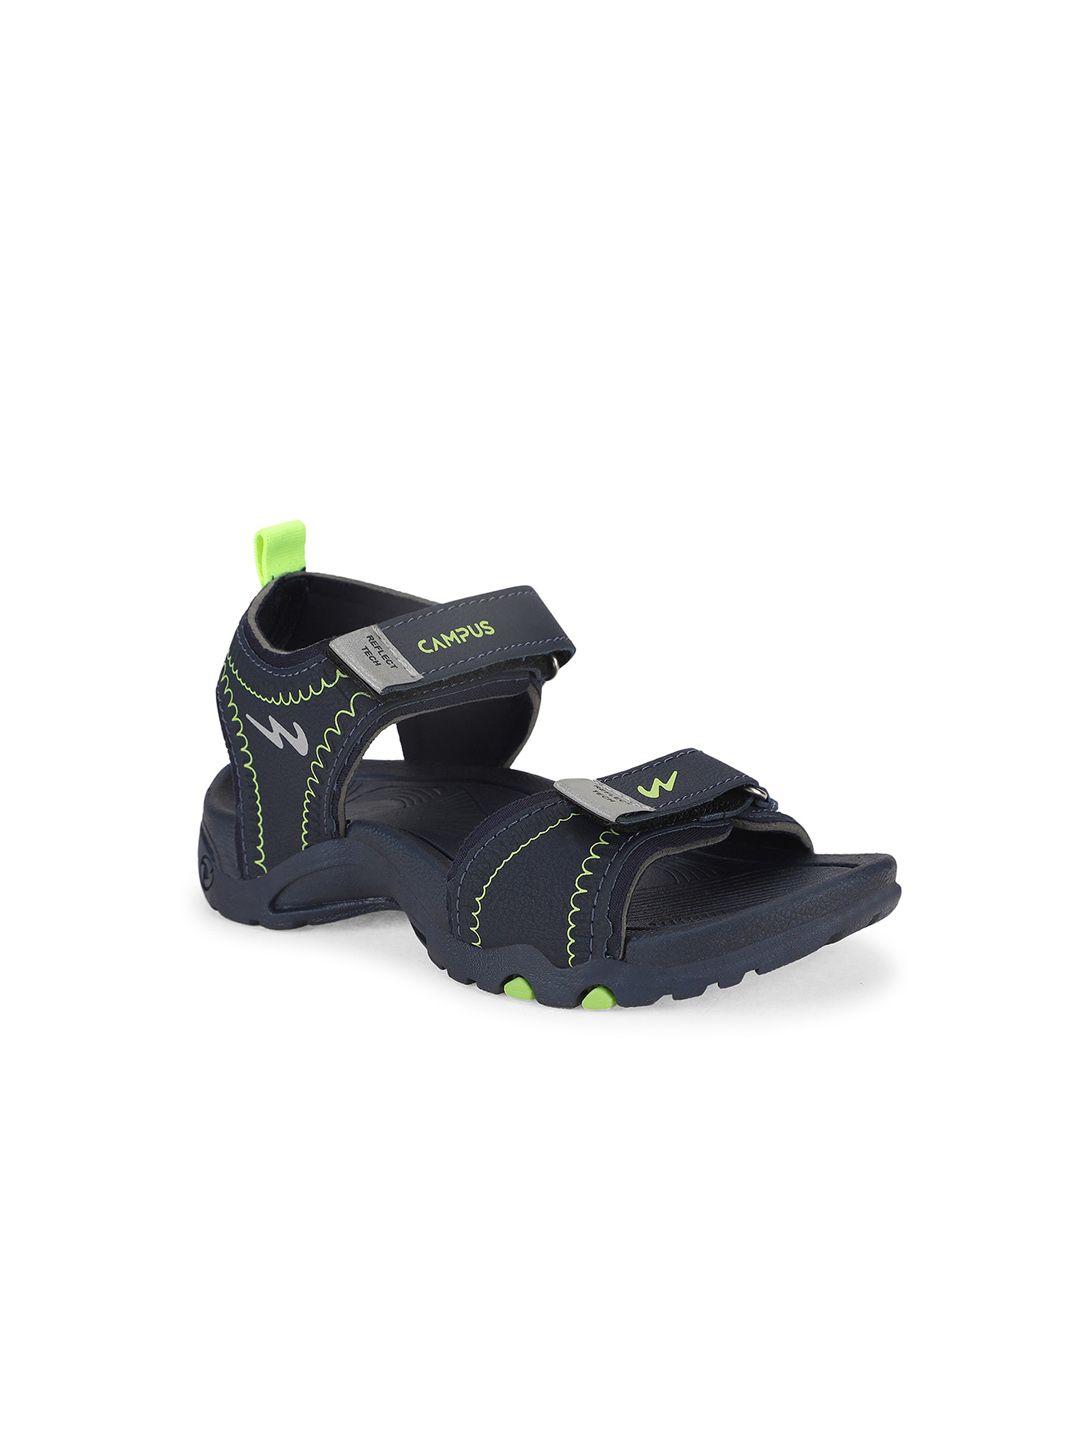 campus-kids-textured-sports-sandals-with-velcro-closure